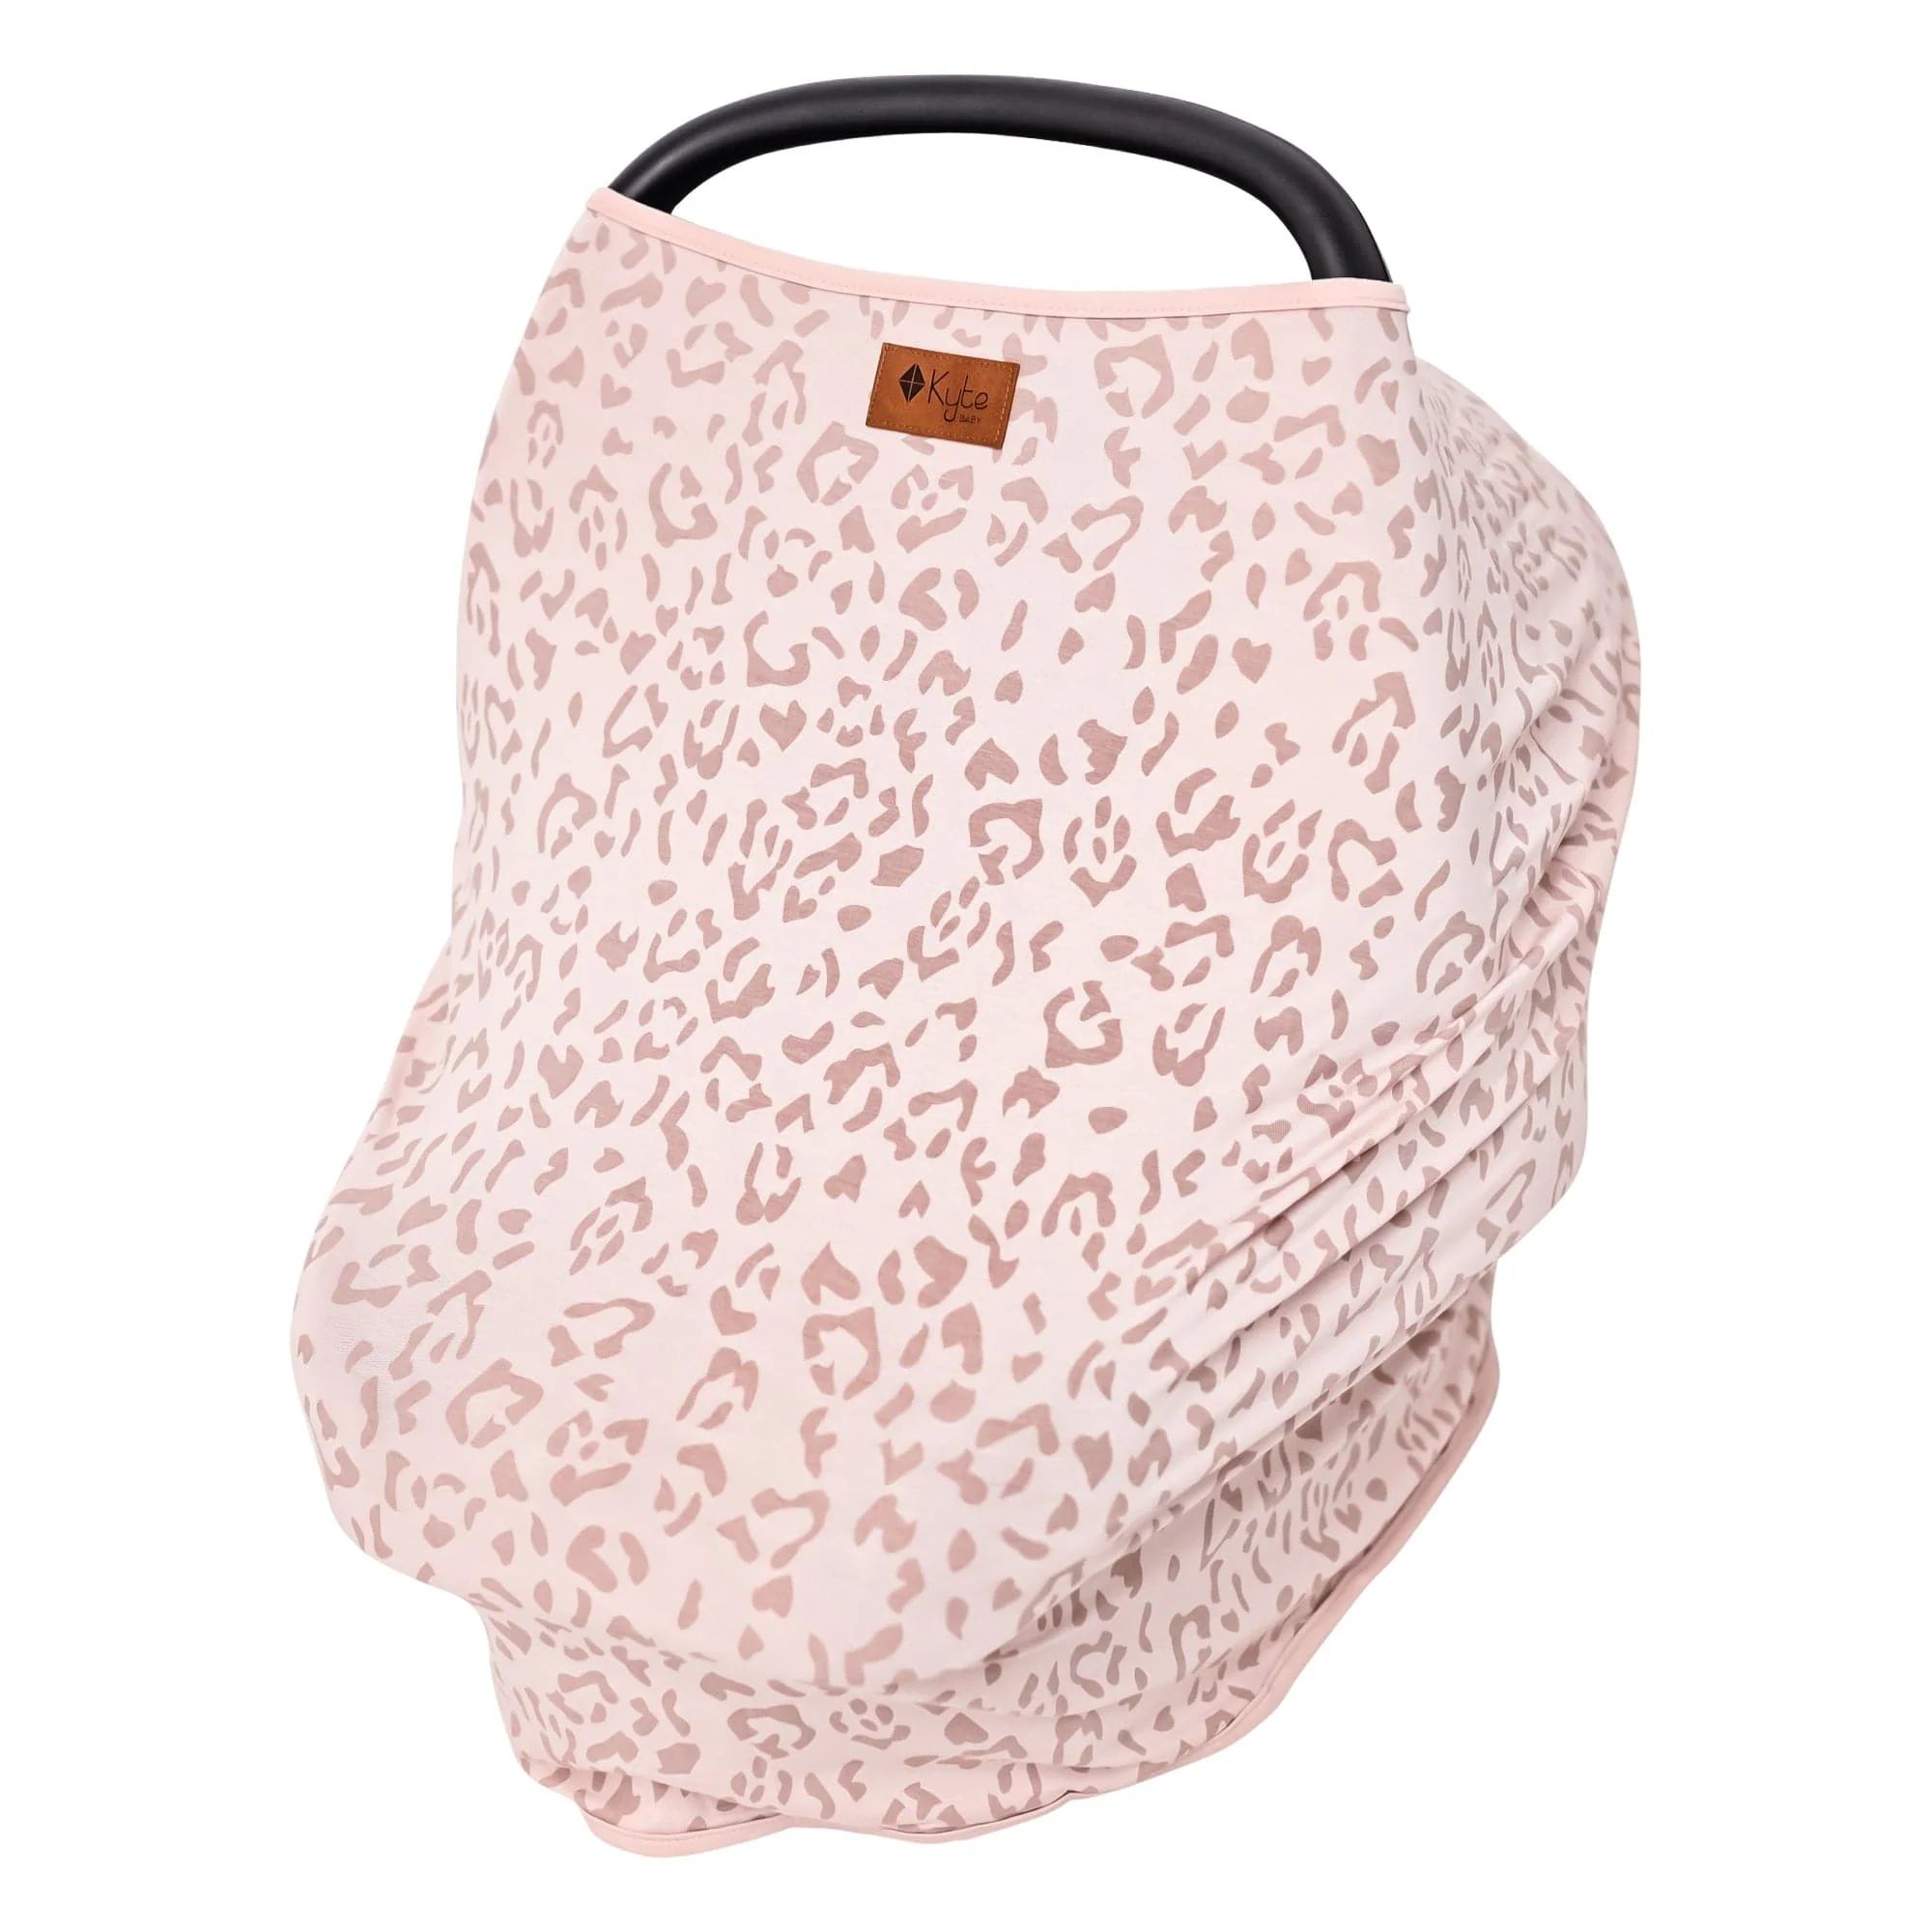 Car Seat Cover in Big Blush Leopard | Kyte BABY